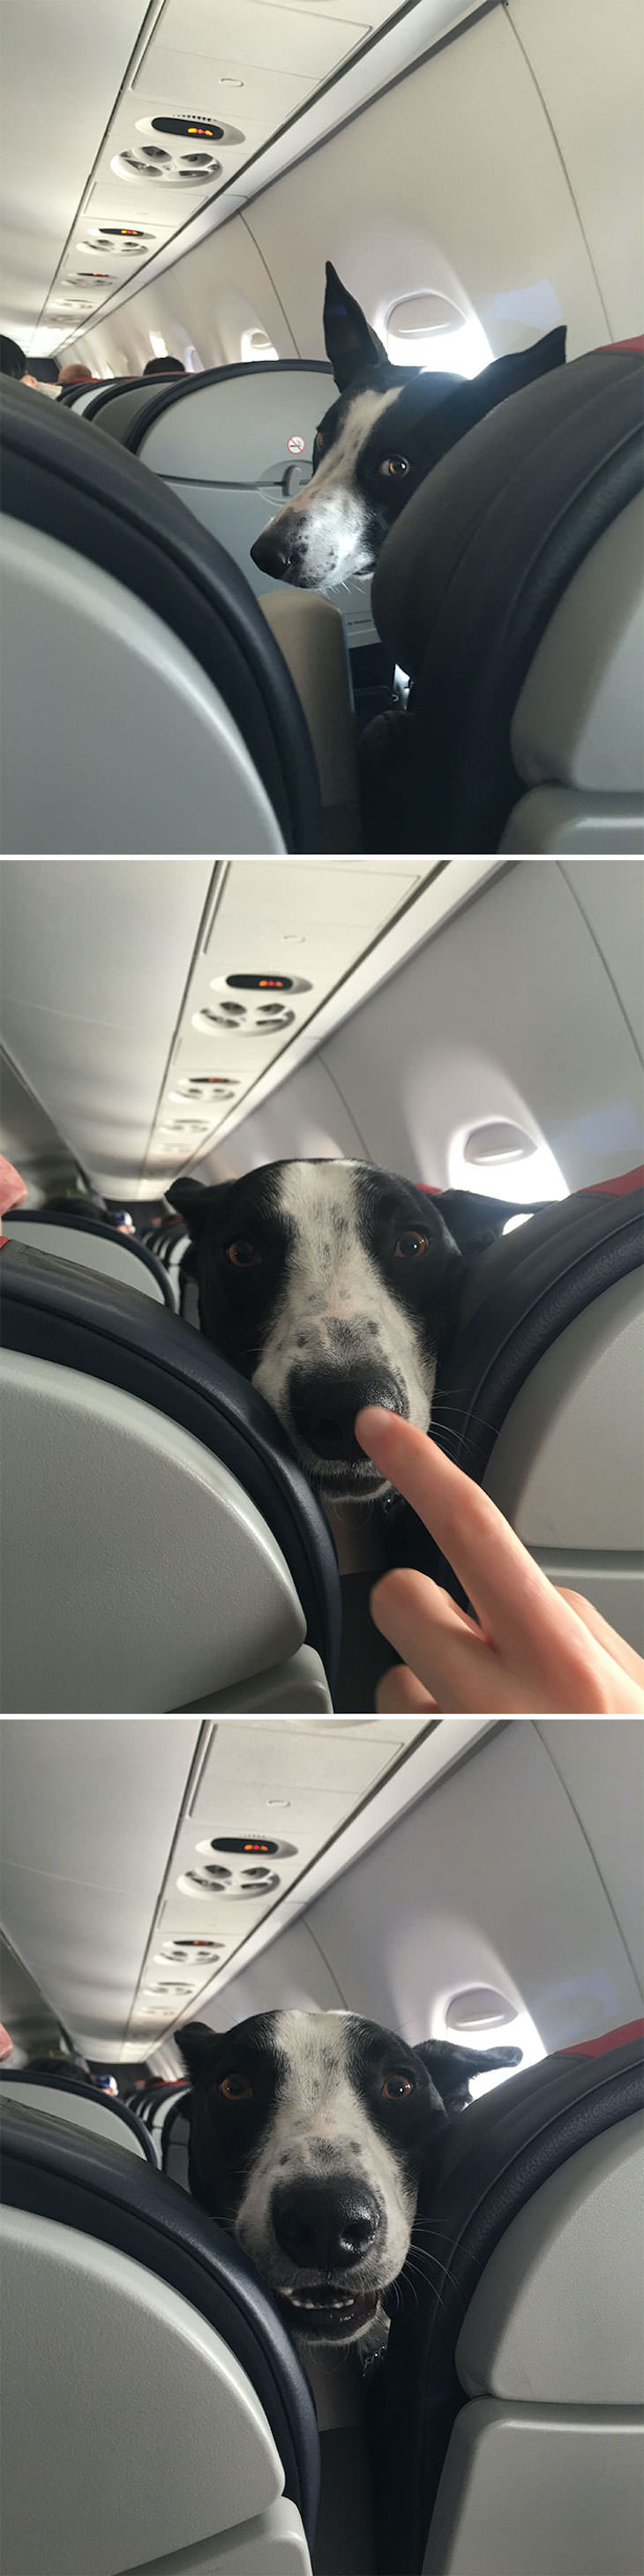 17 Adorable Animals Spotted On Public Transport, dog on plane